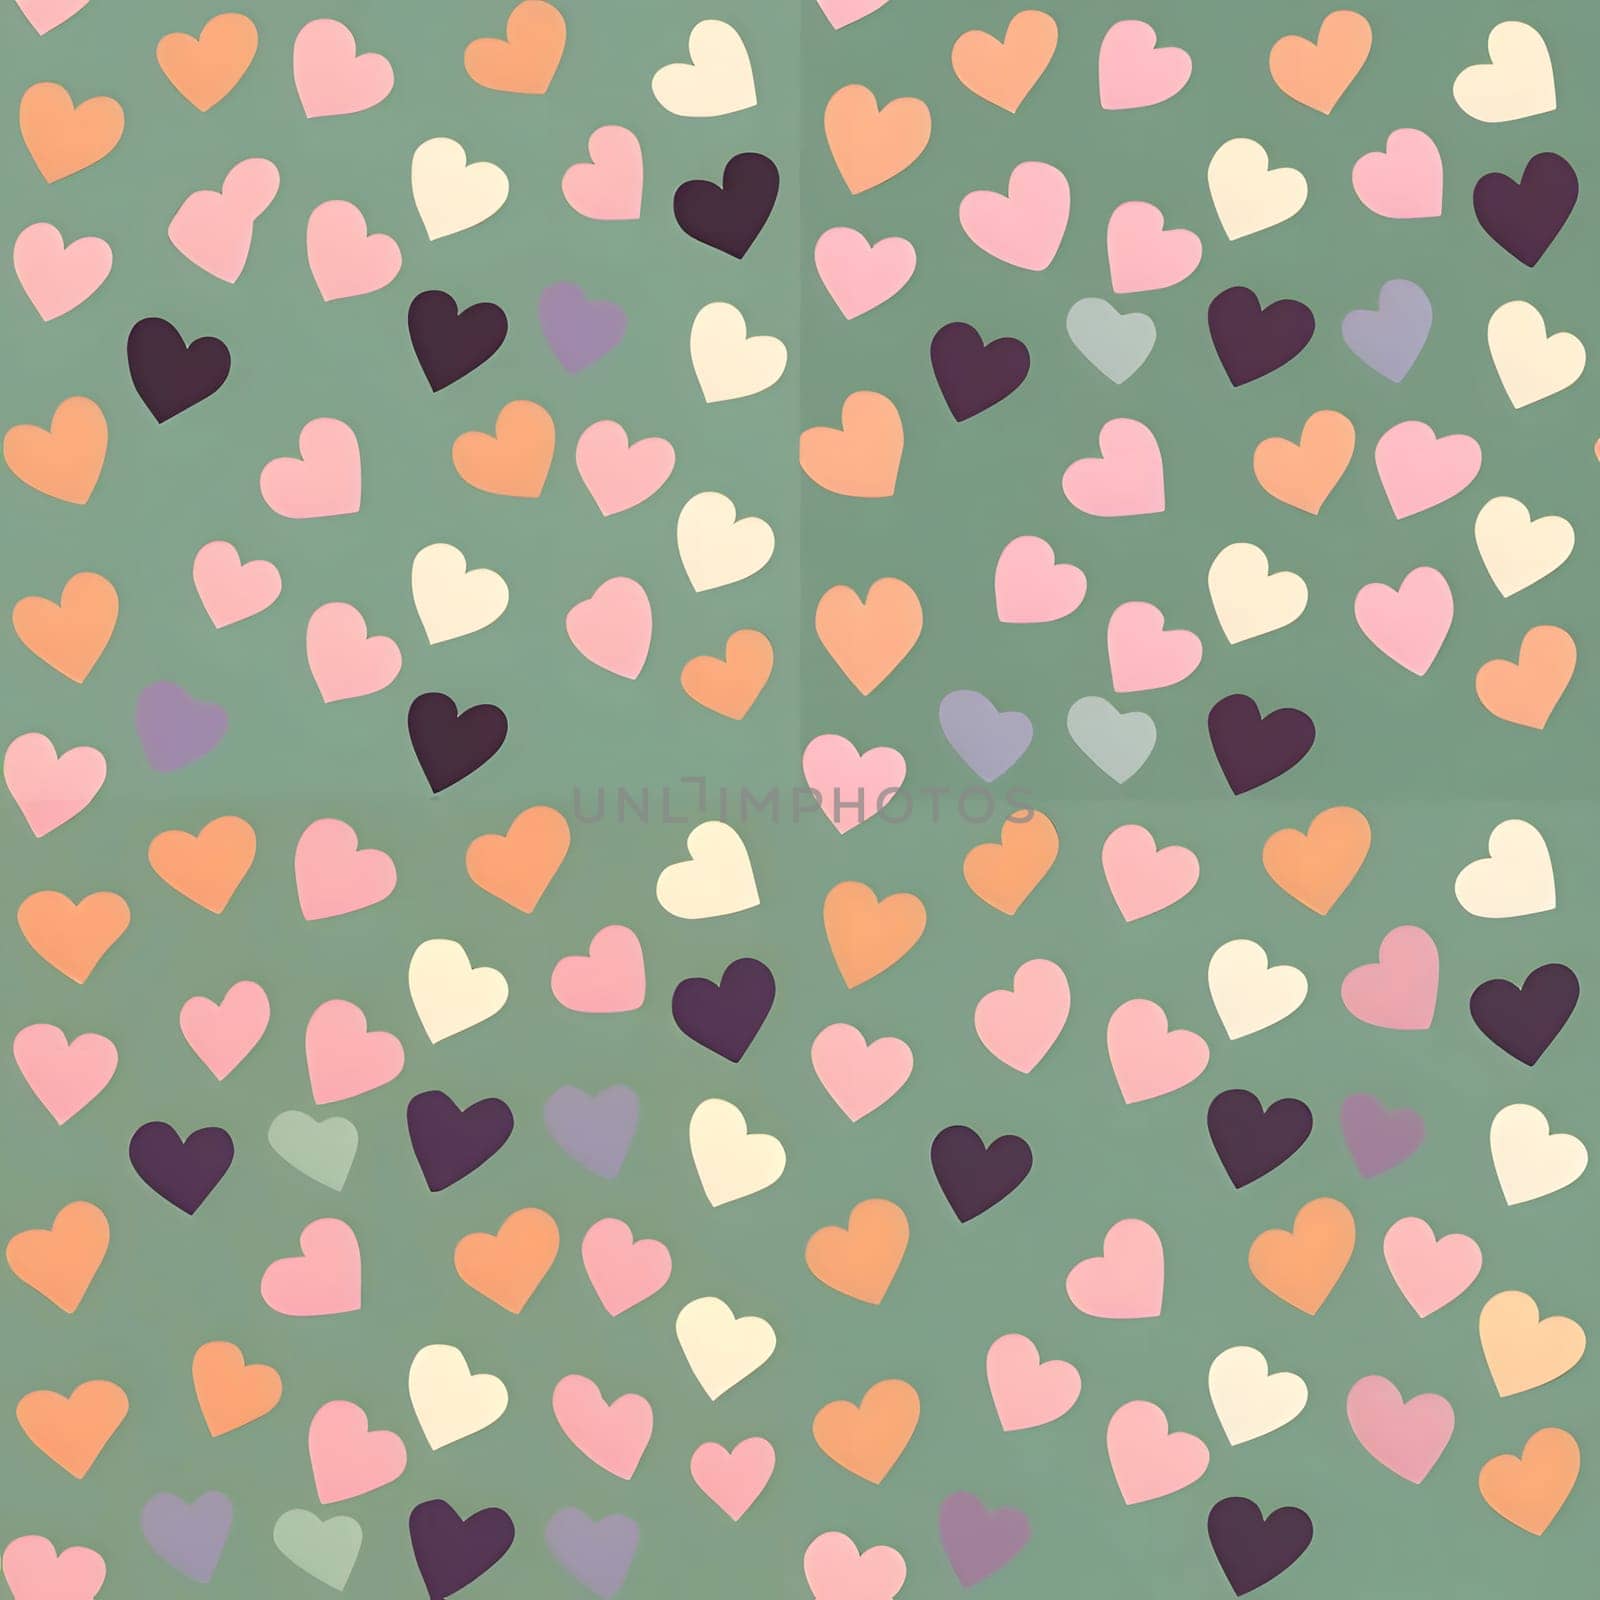 Patterns and banners backgrounds: Seamless pattern with hearts on a green background. Vector illustration.